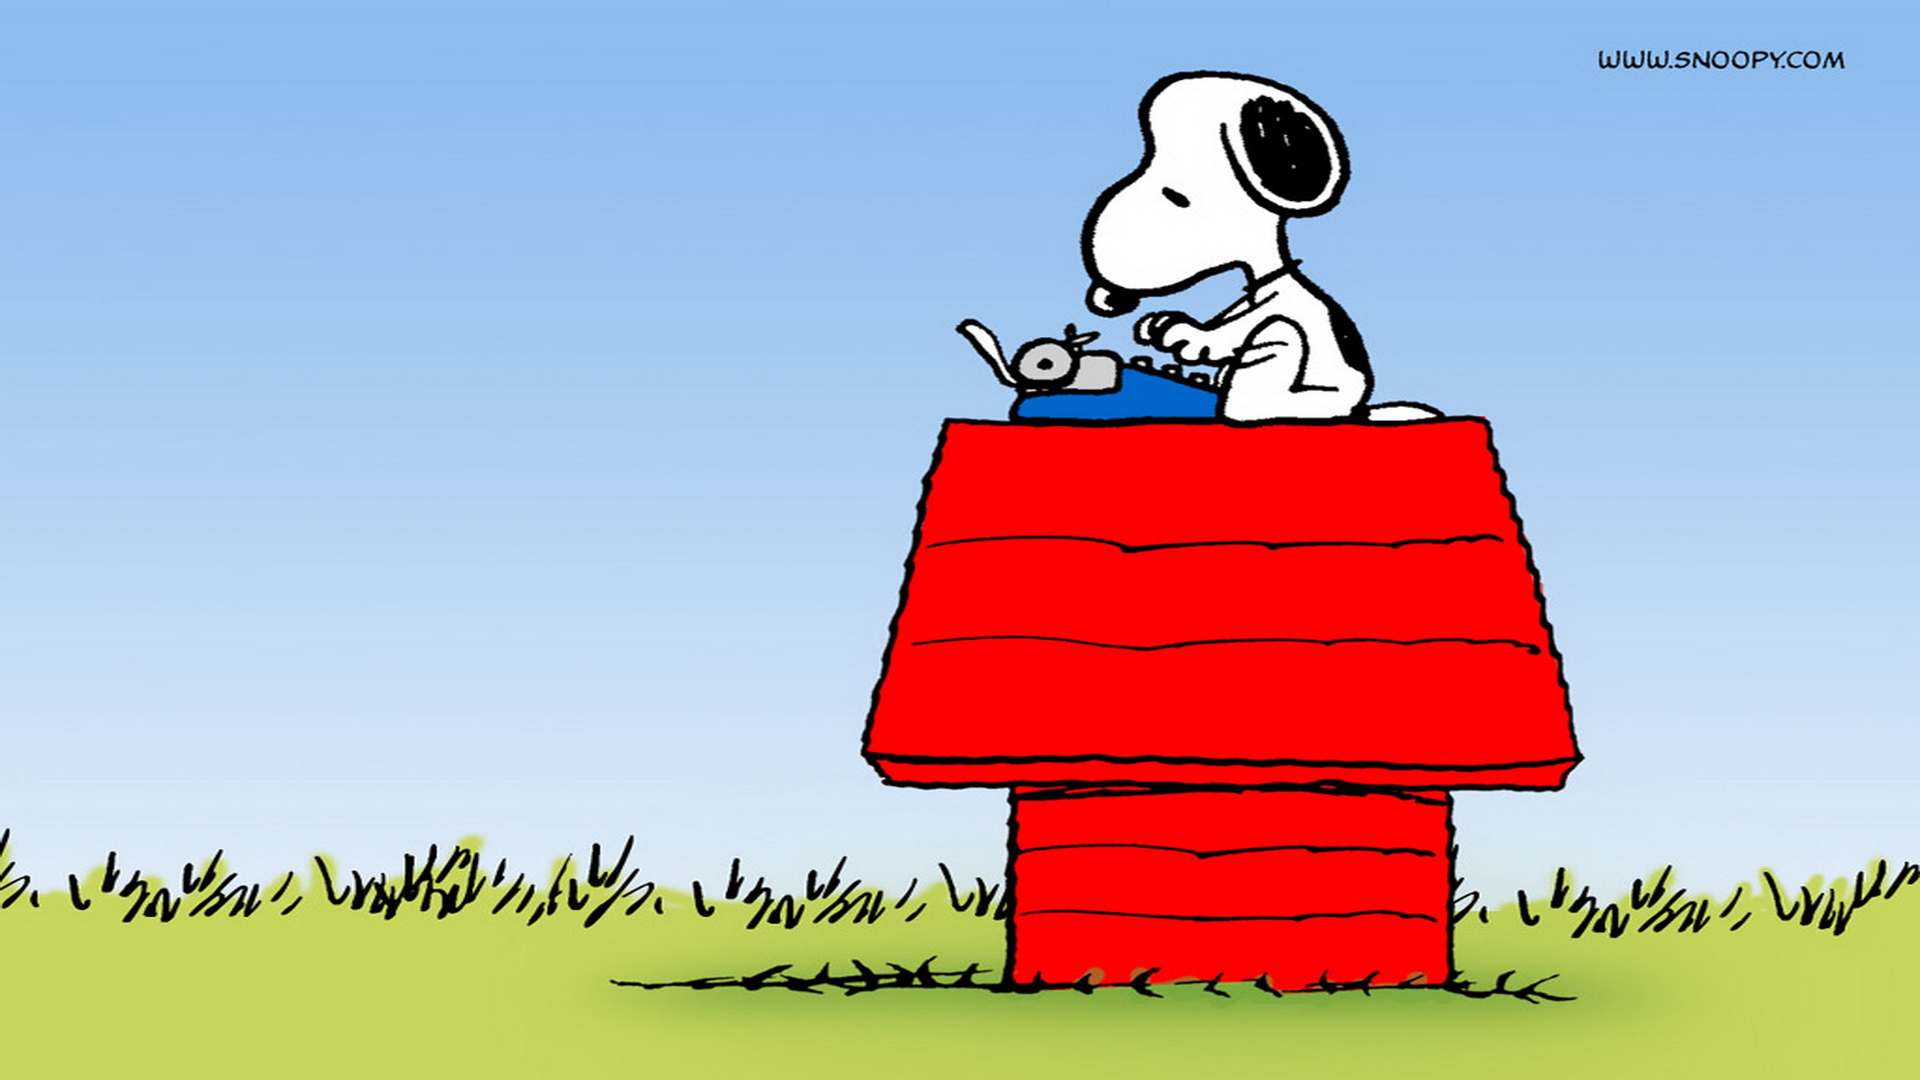 Snoopy wallpaper for desktop, download free Snoopy picture and background for PC